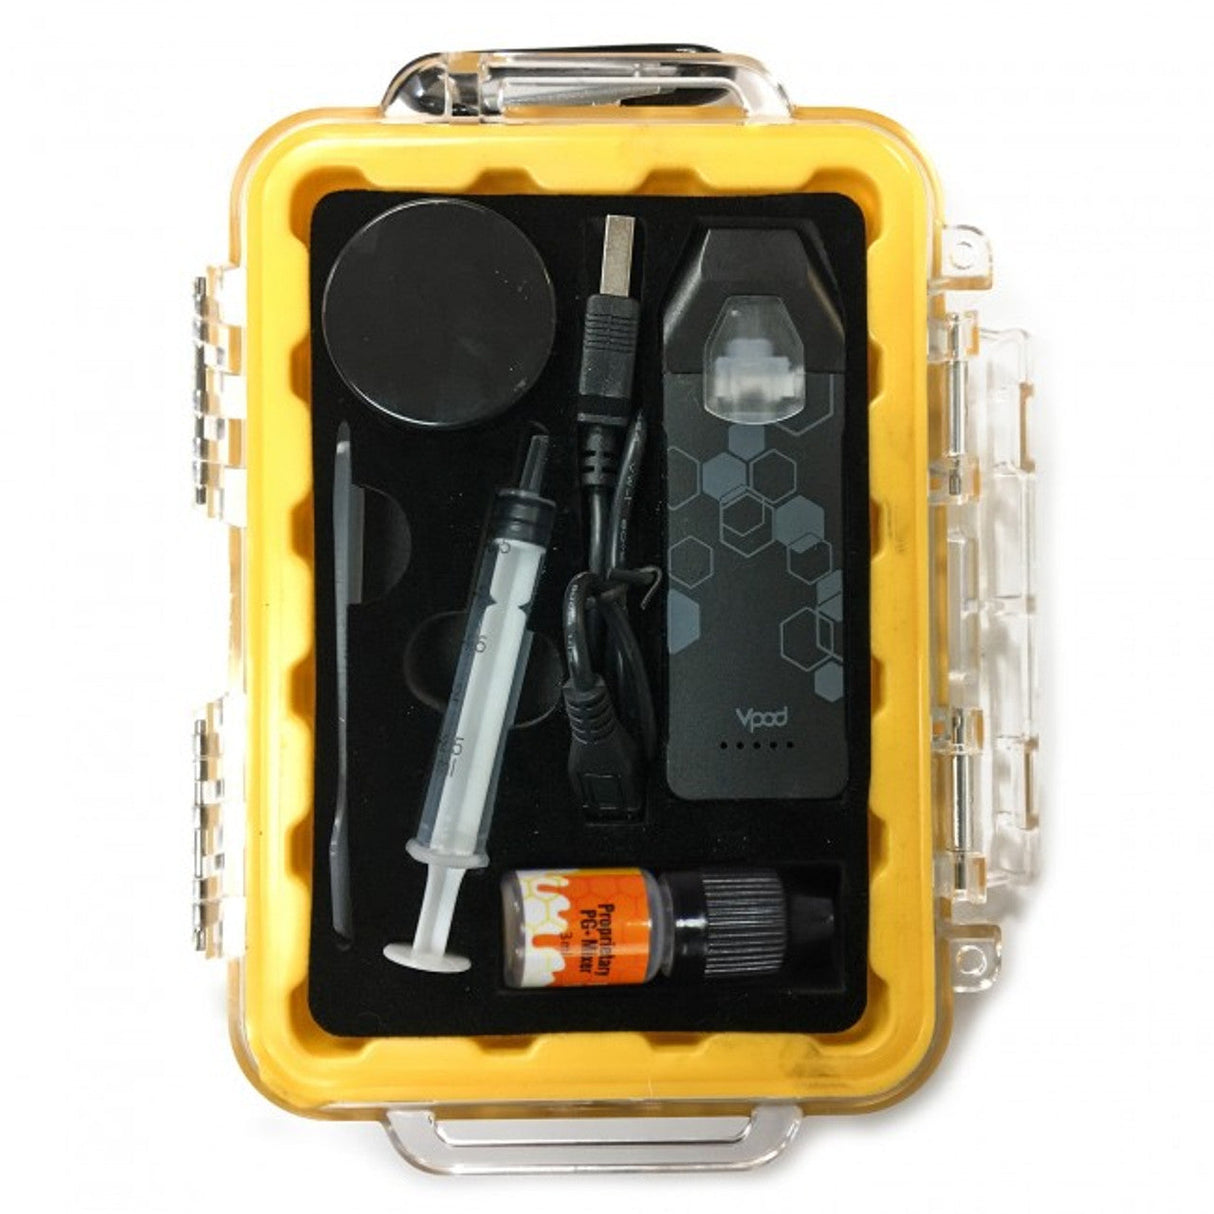 HoneyStick Vpod Kit for concentrates, 400mAh, with accessories in a portable case - top view